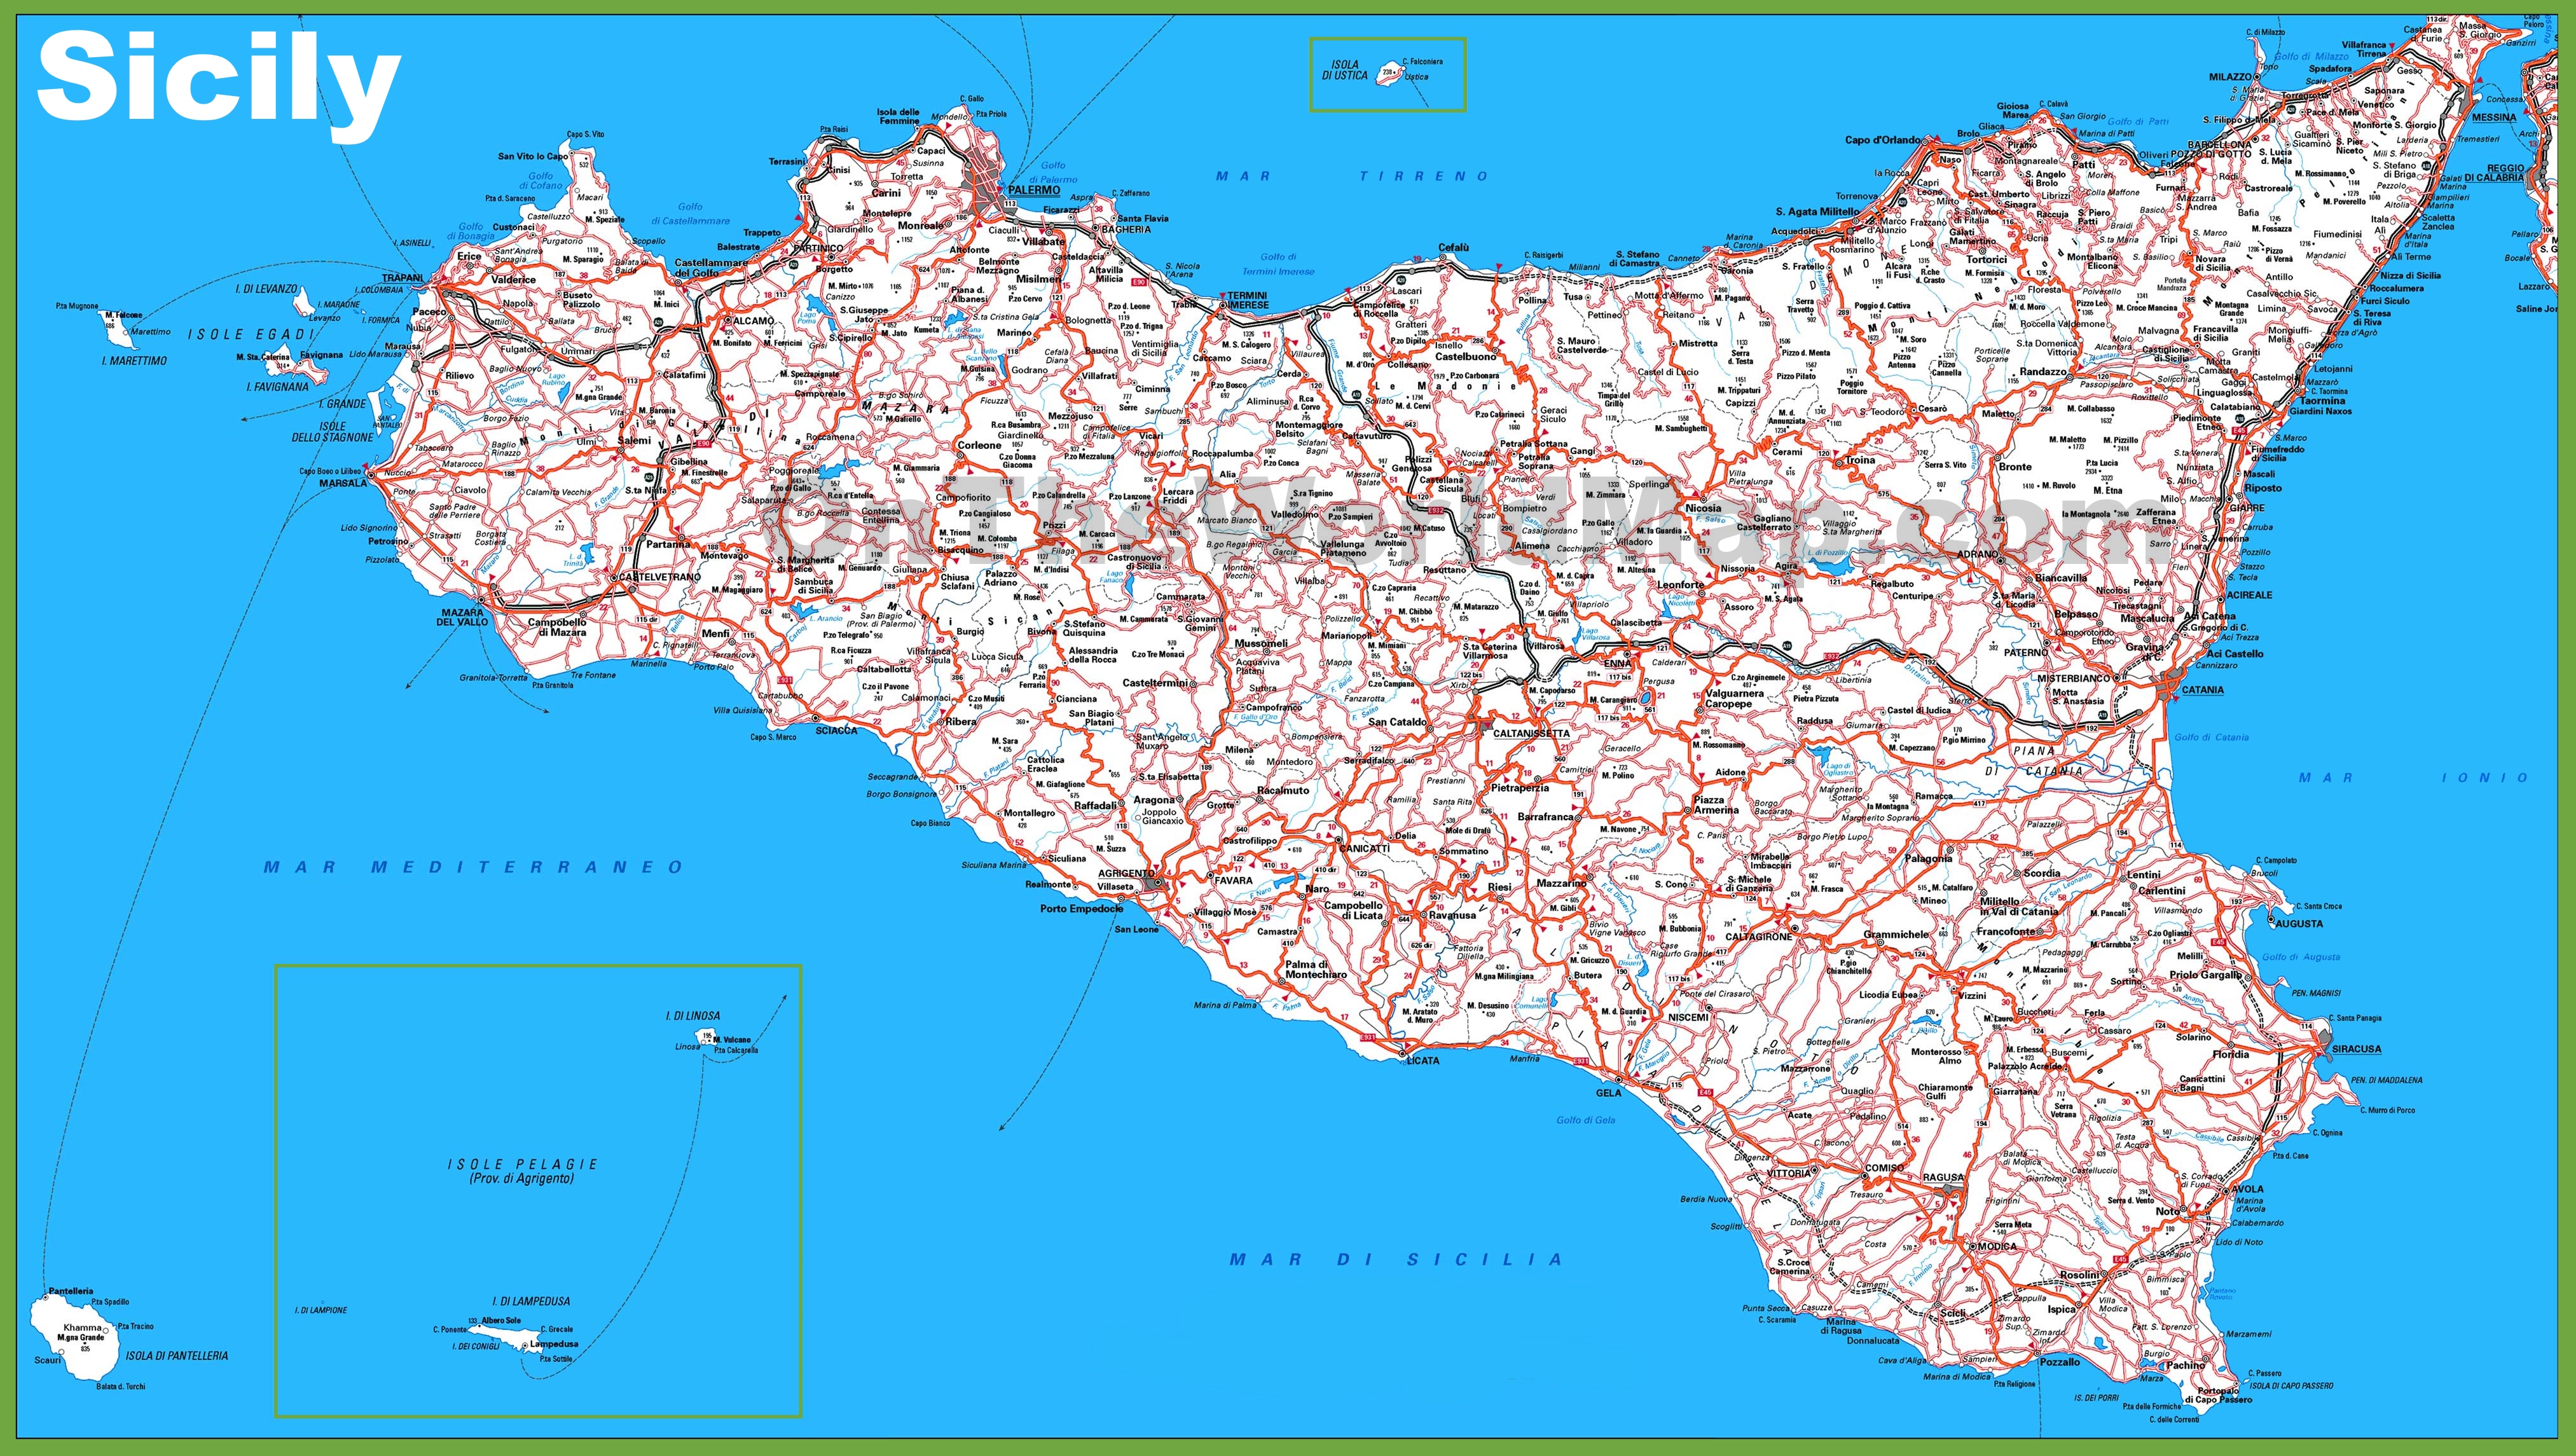 Where can you find a detailed map of Italy that shows cities and towns?